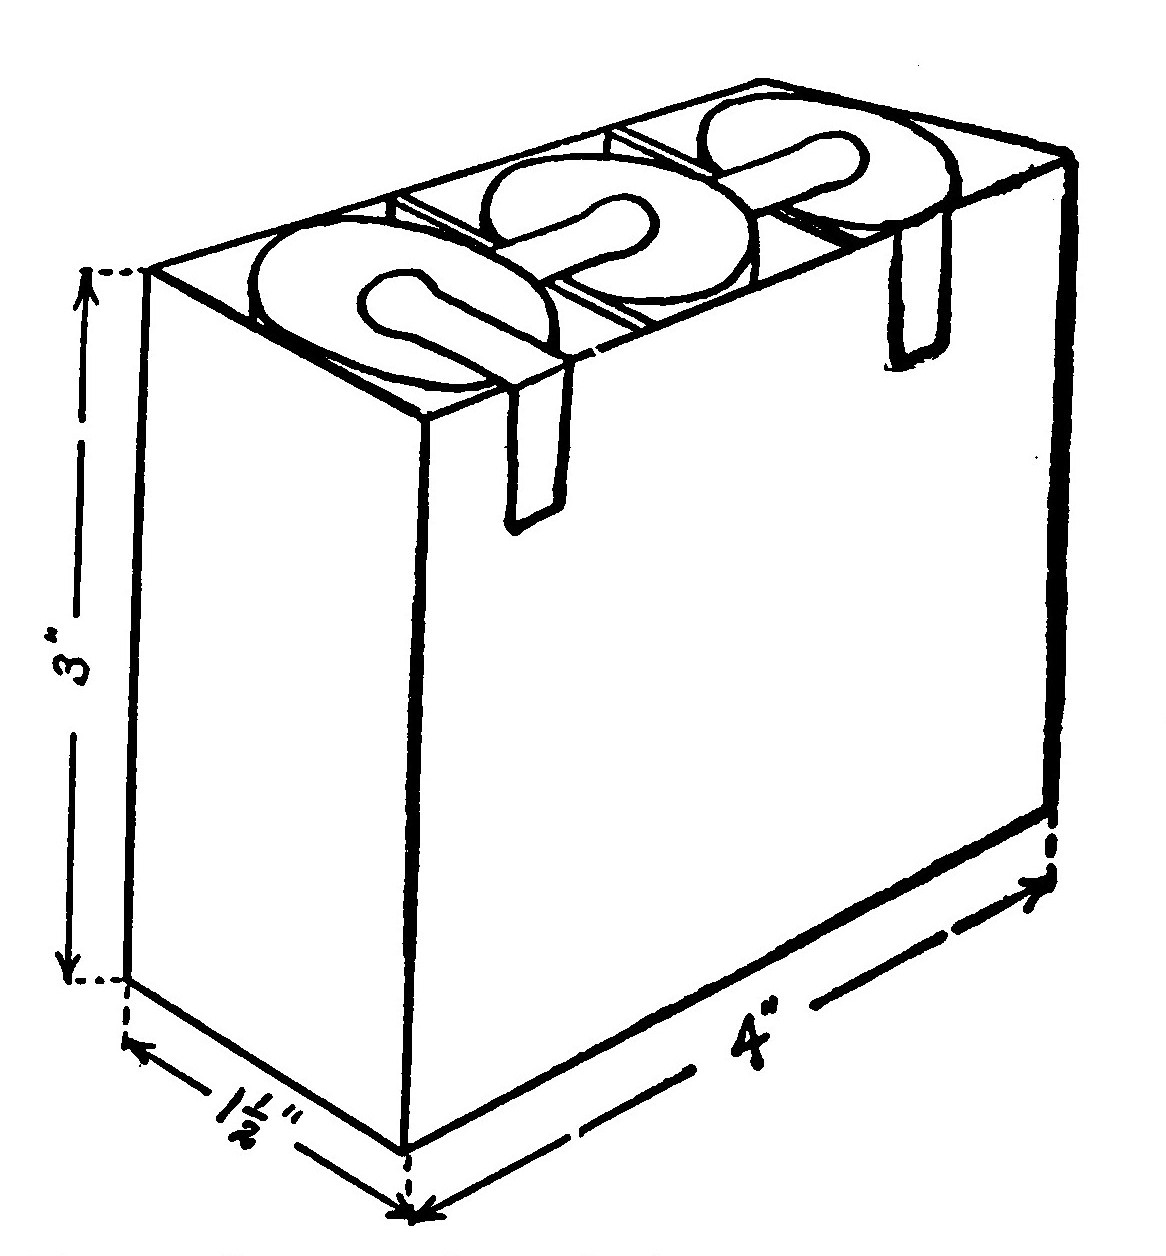 Fig. 294.—A Three-Cell Dry Battery for use in Hand-Lanterns, etc.